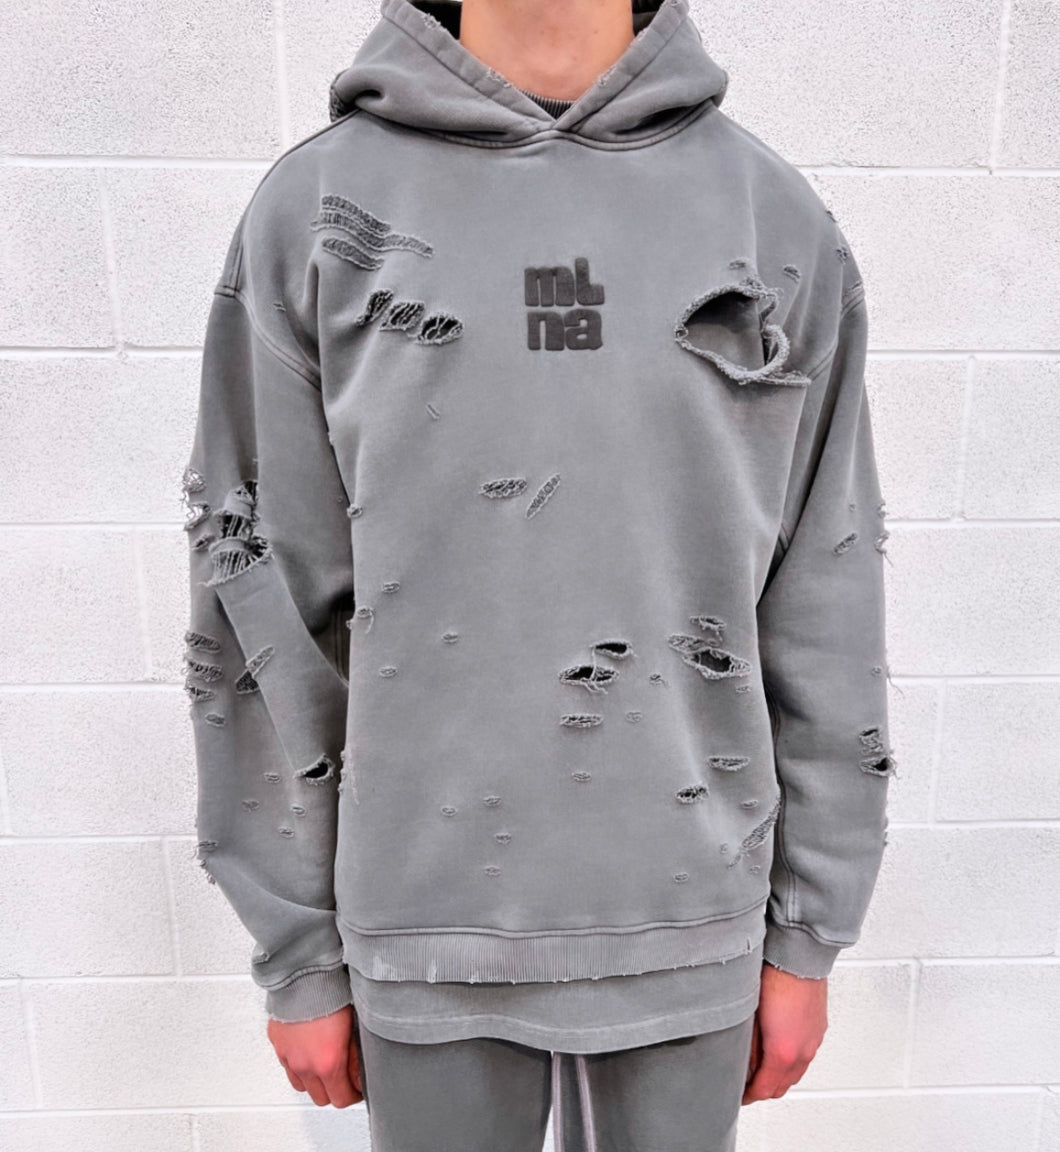 Washed Charcoal Heavyweight Distressed Hoodie.